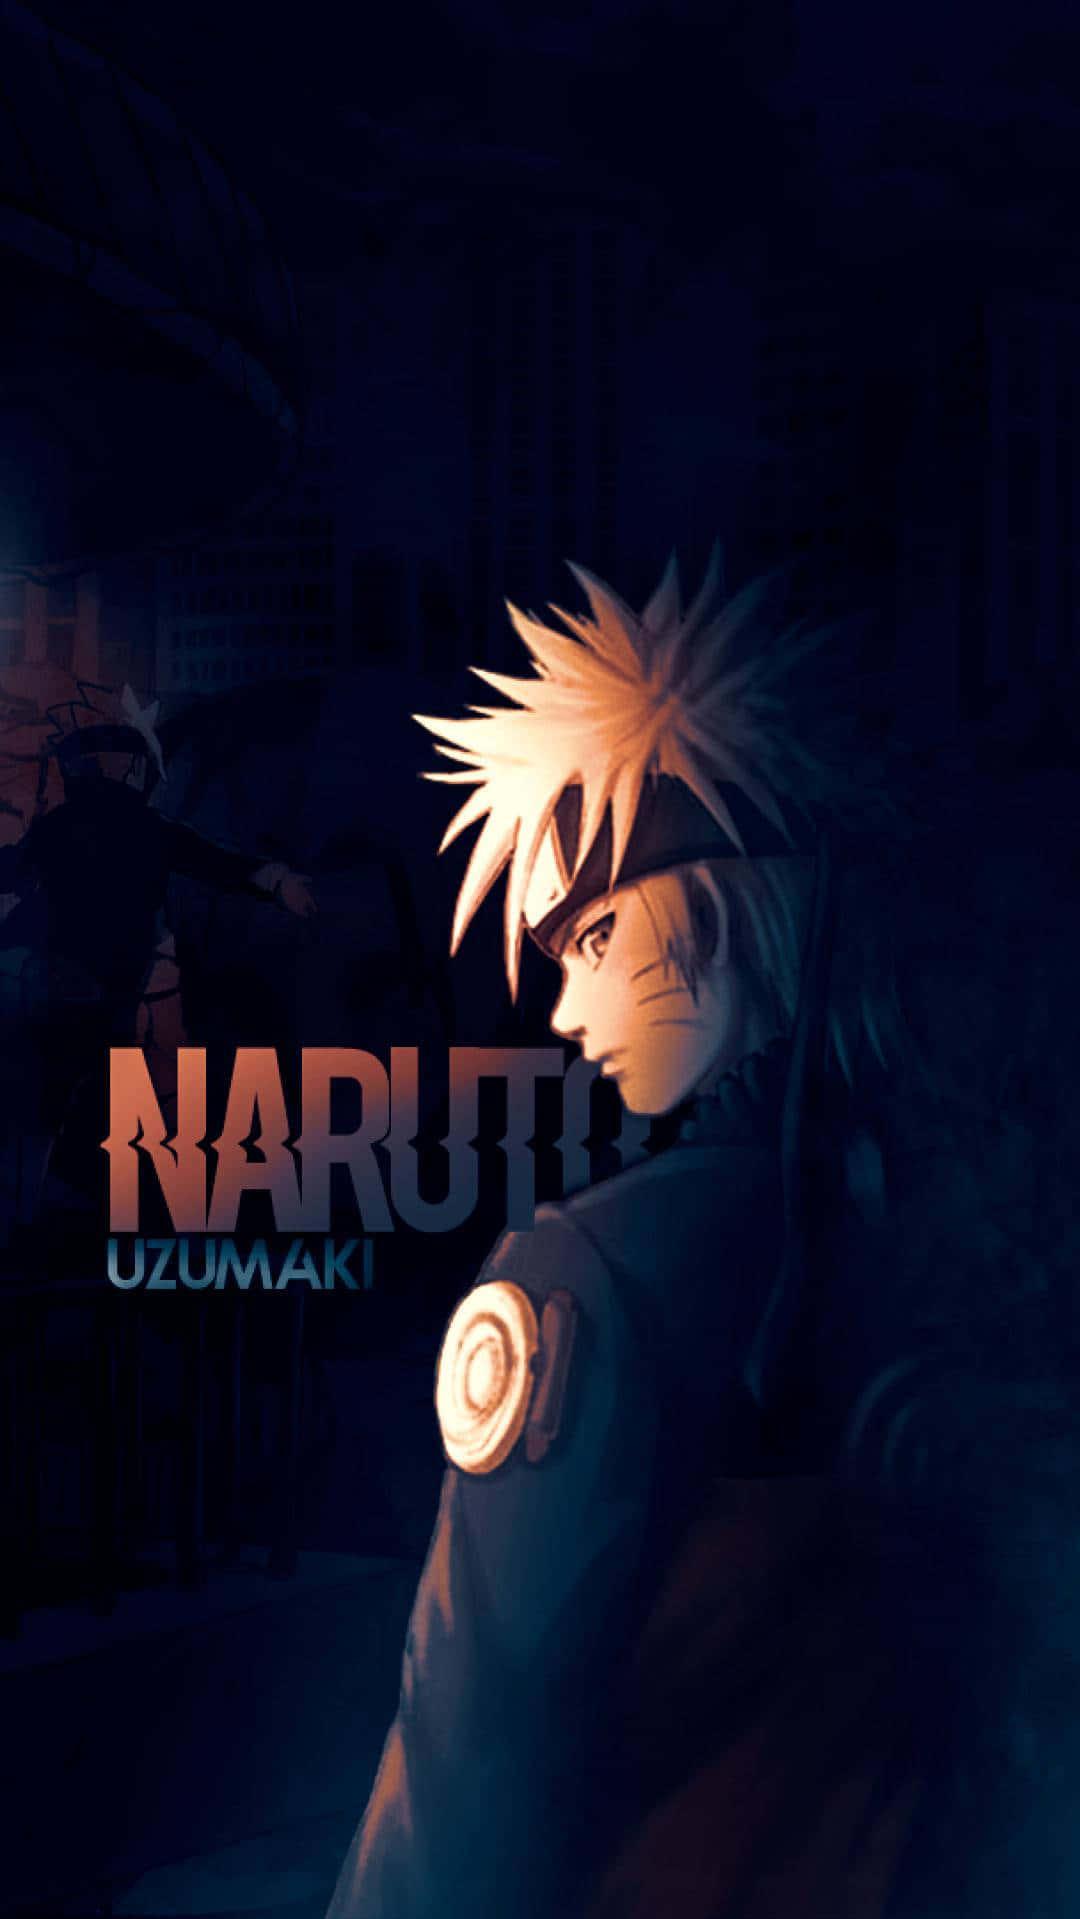 A Lonely Naruto Embracing His Sorrow In Solitude